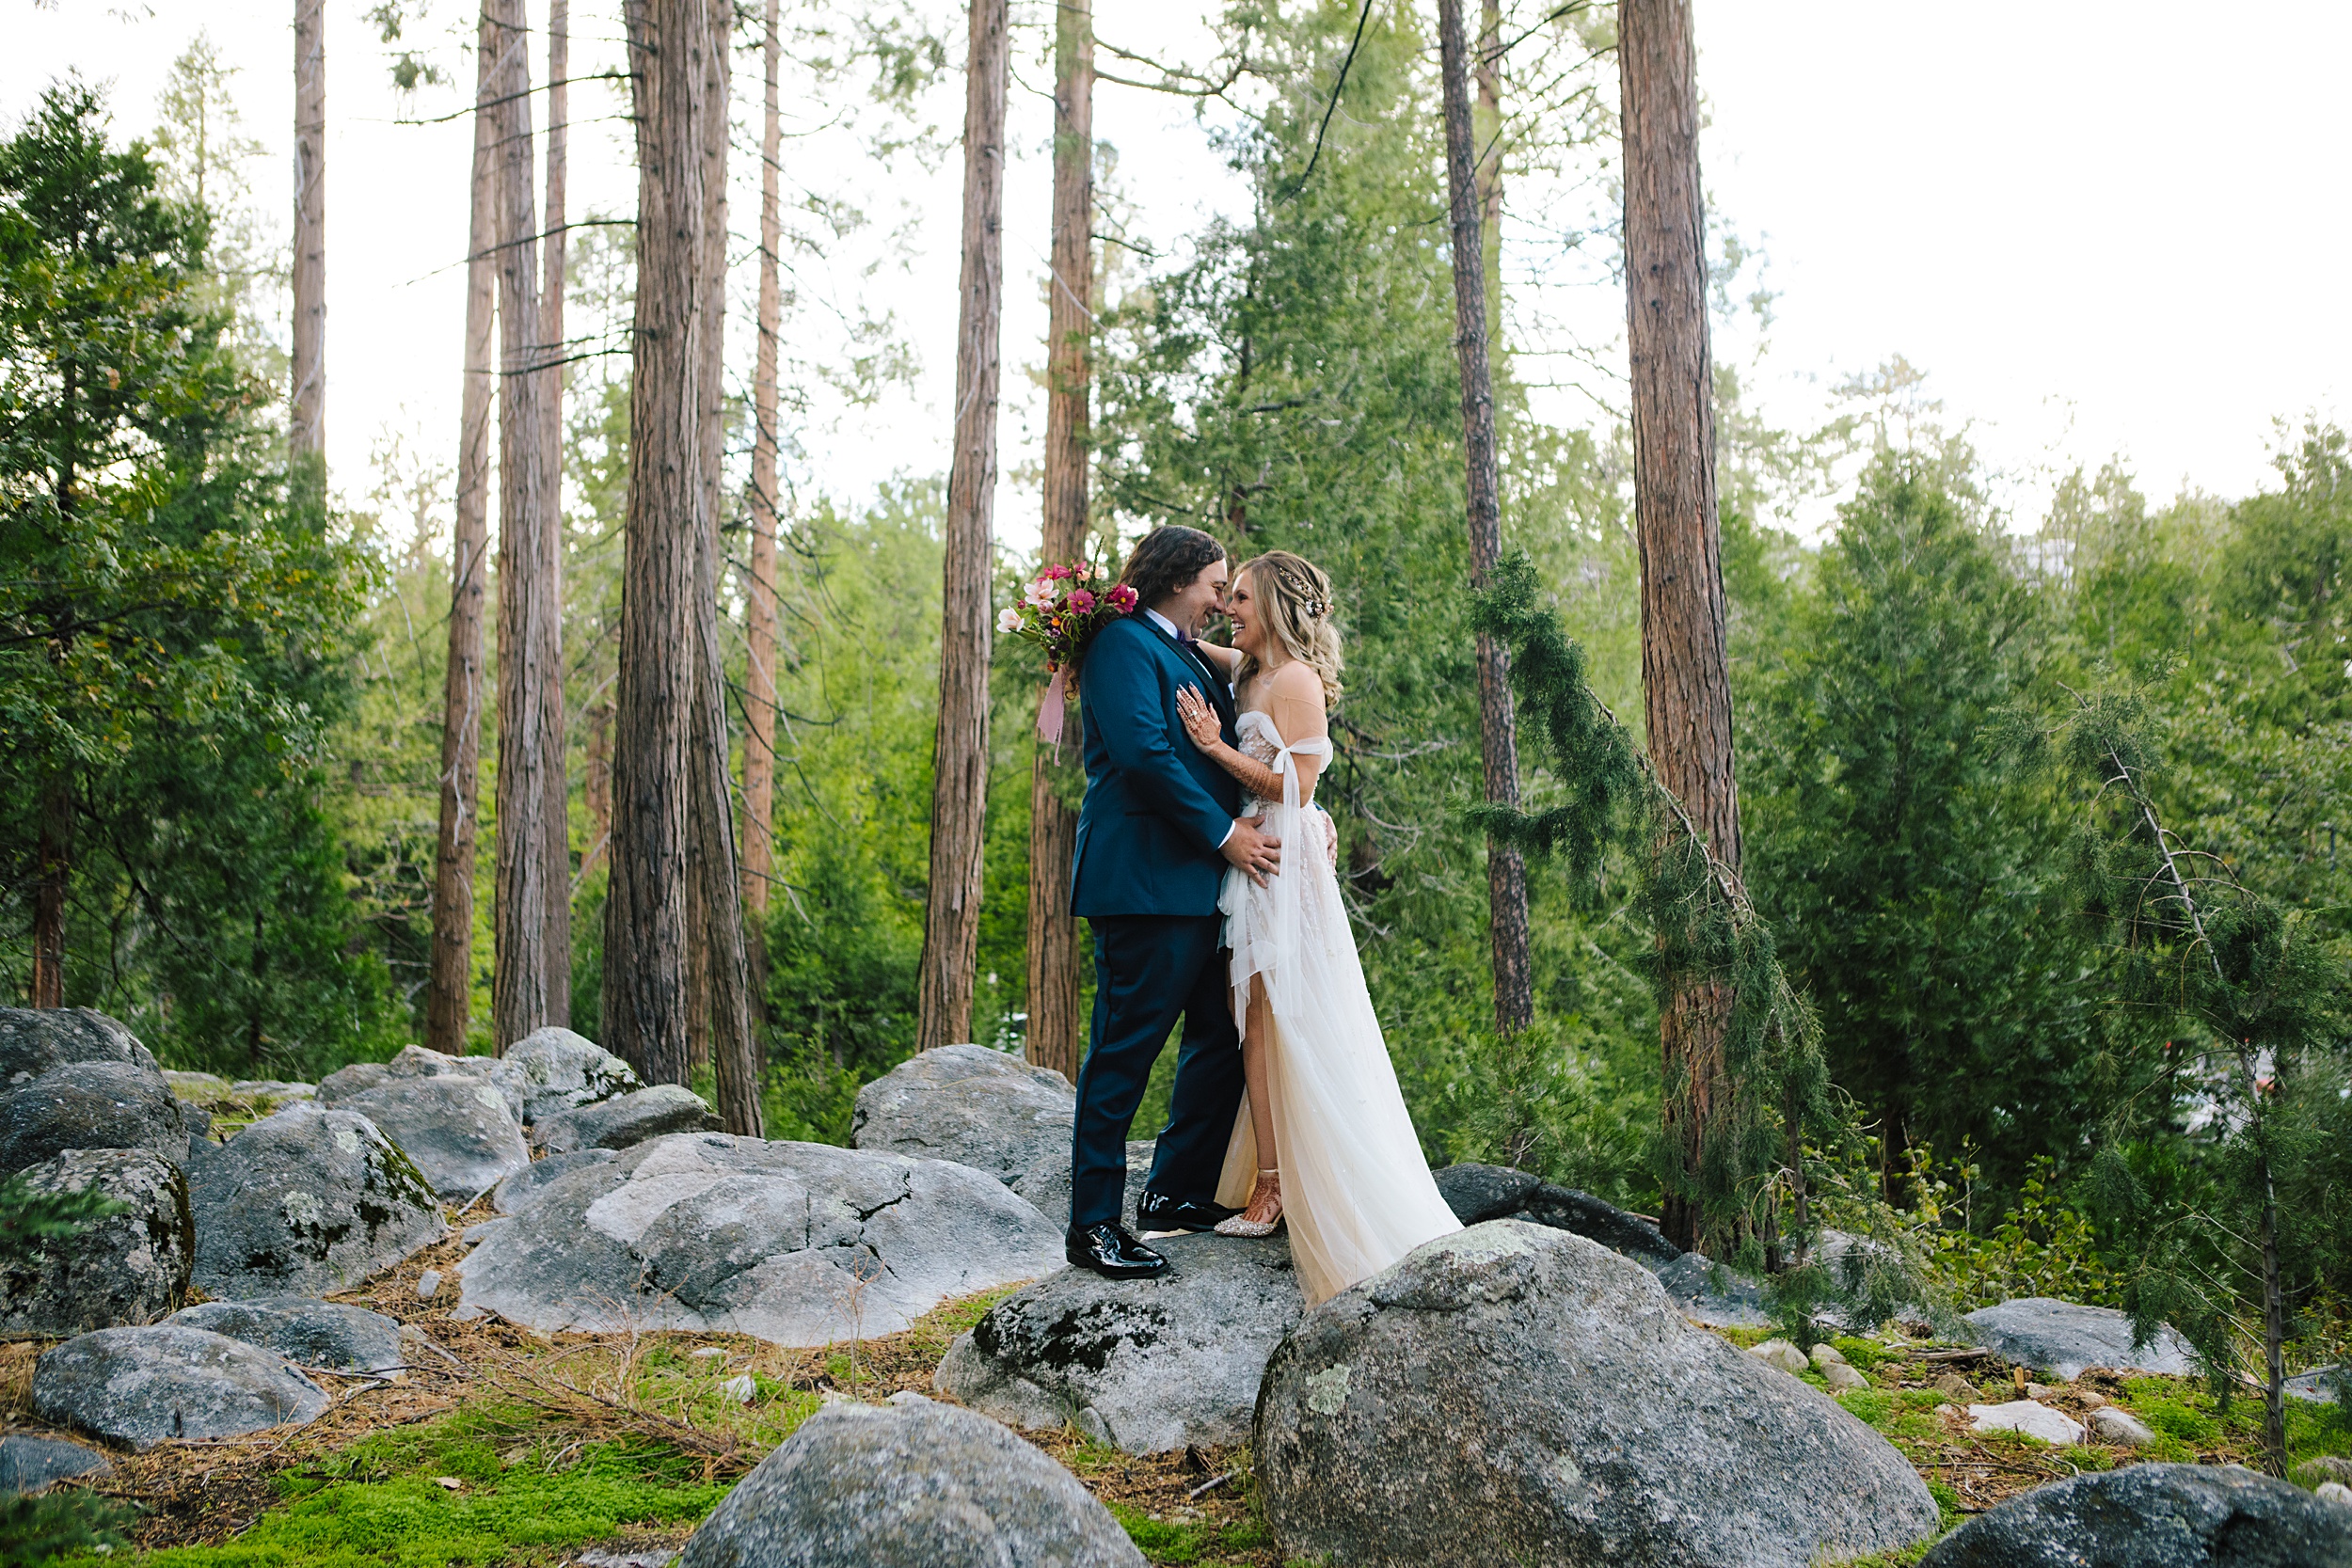 Rachelle-and-Steven-51 Romantic Idyllwild Forest Elopement with Family￼